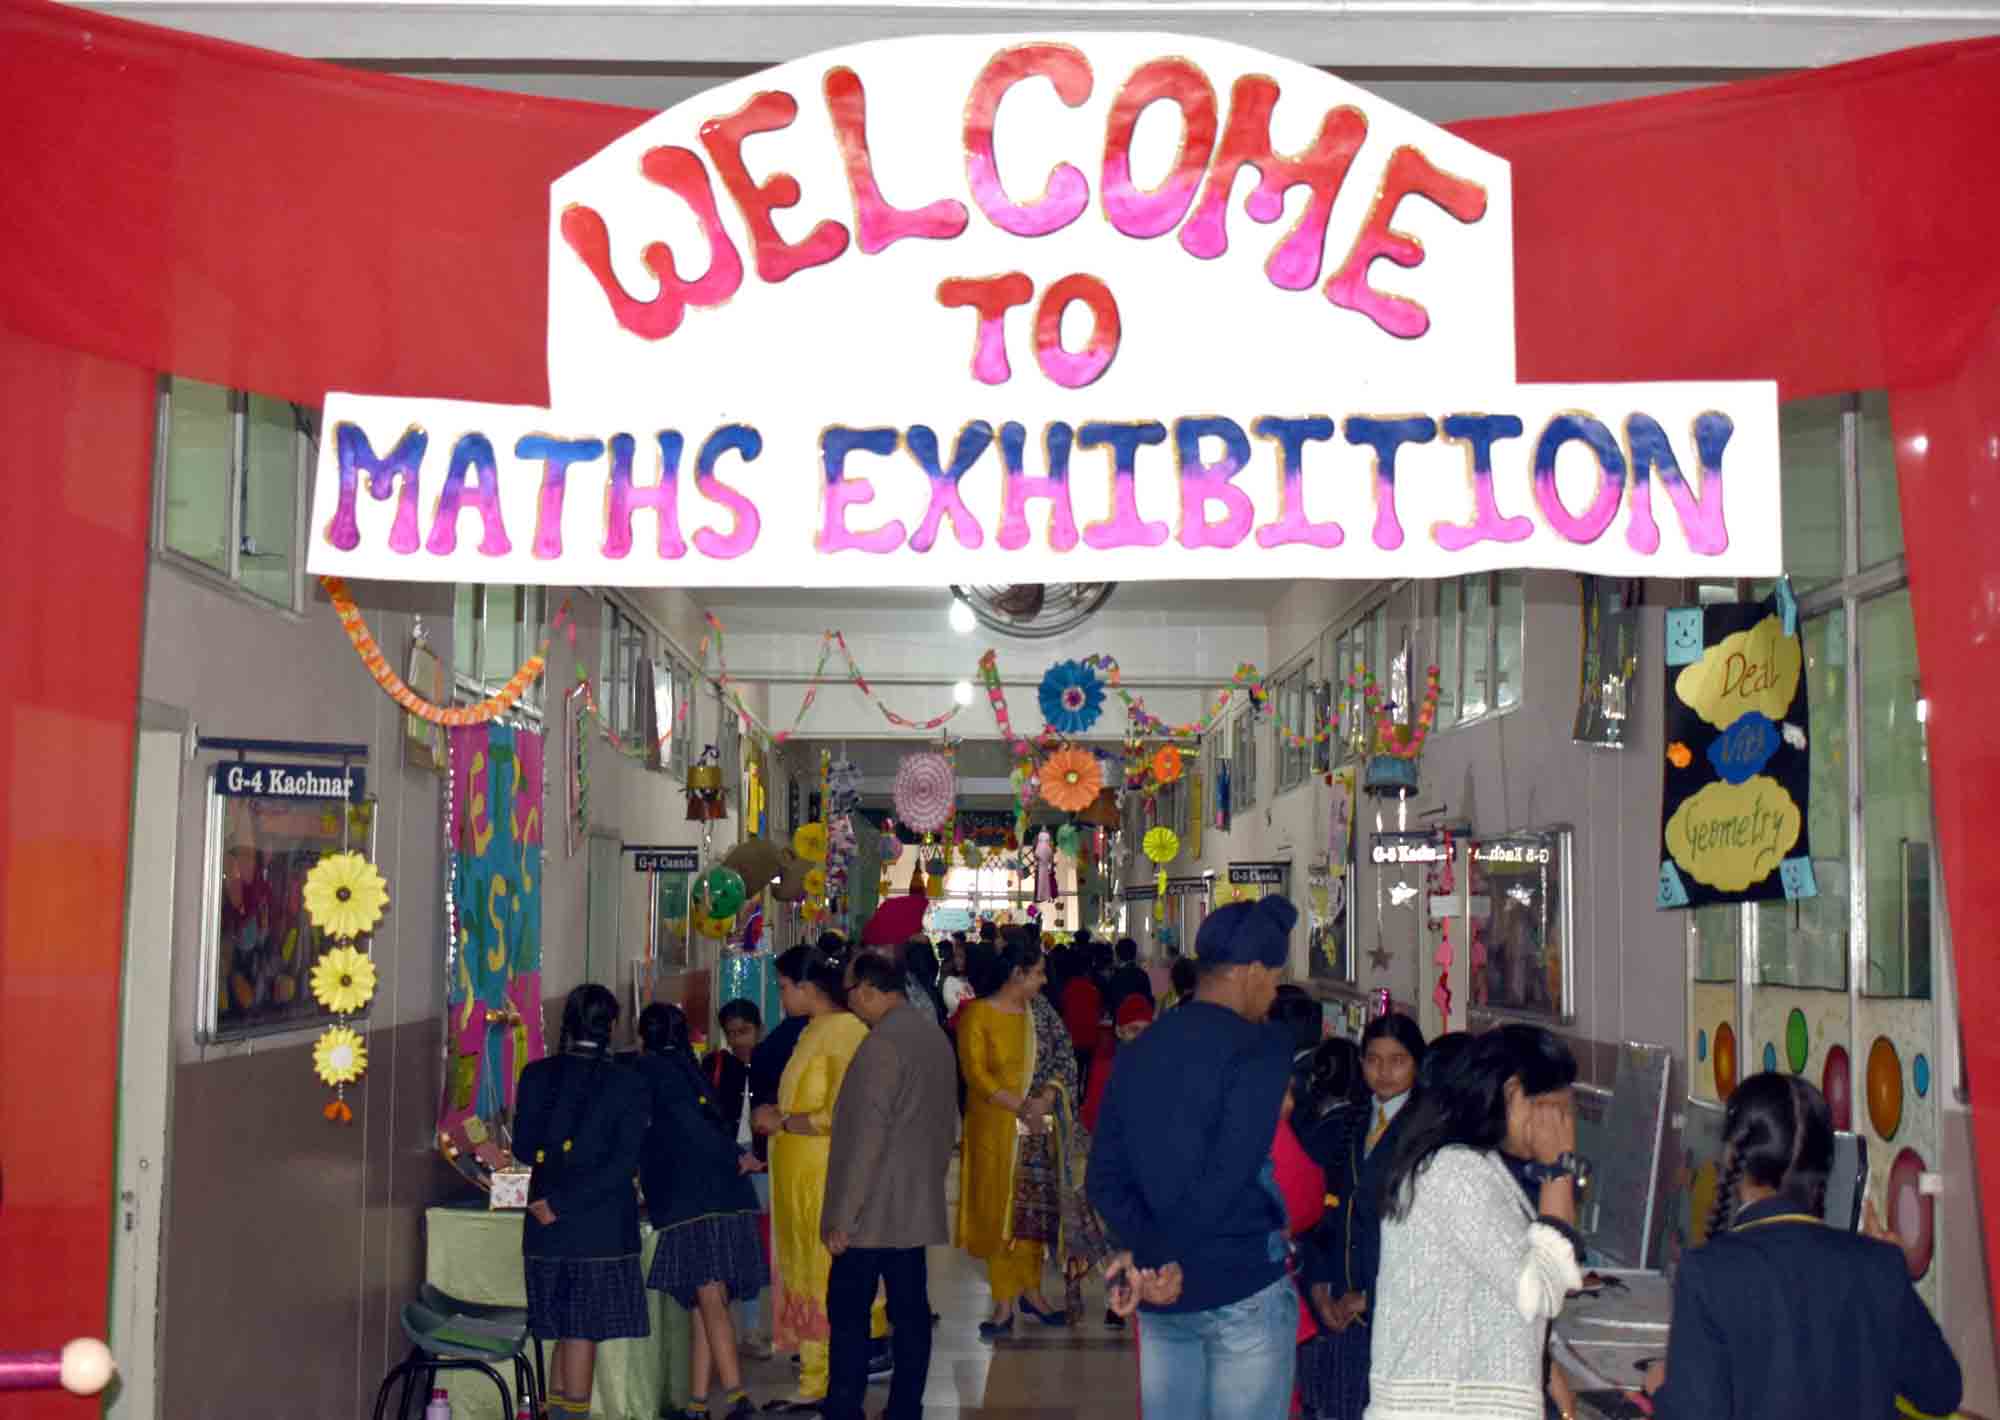 Maths Exhibition Conducted By Grade 4/5 Mathematicians